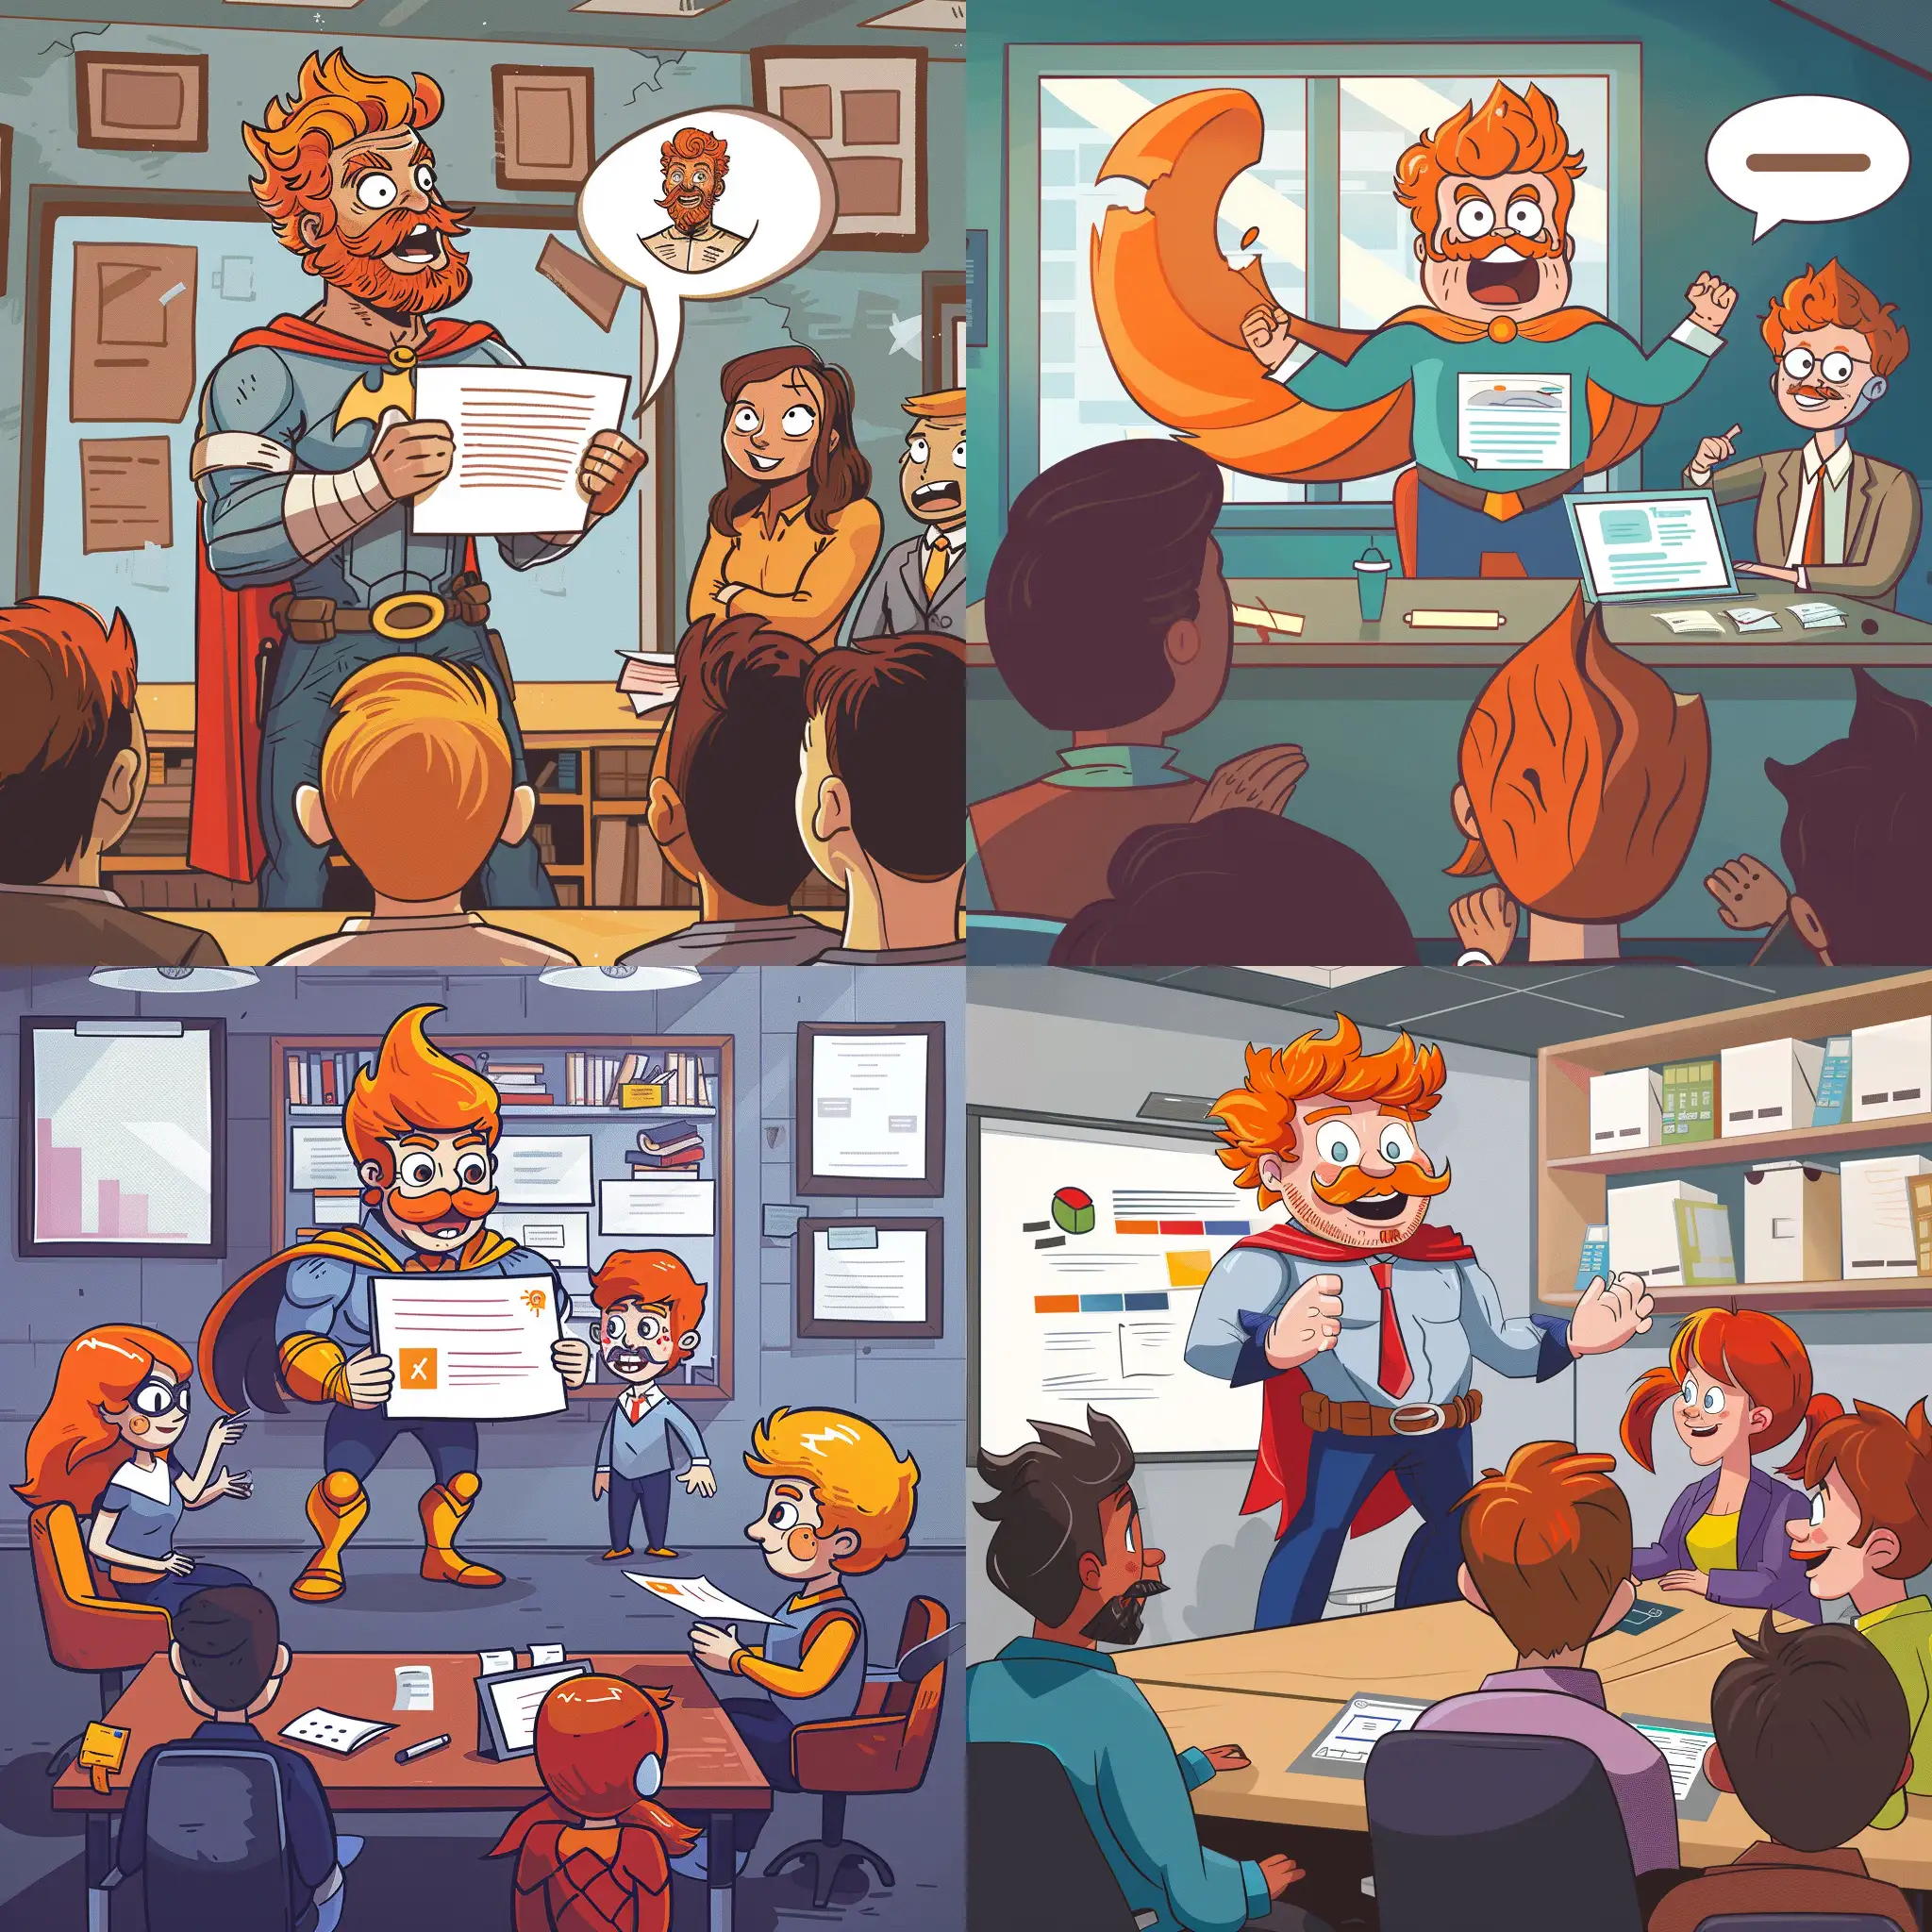 Ginger-Superhero-Delivers-Dynamic-PowerPoint-Presentation-in-Office-Setting